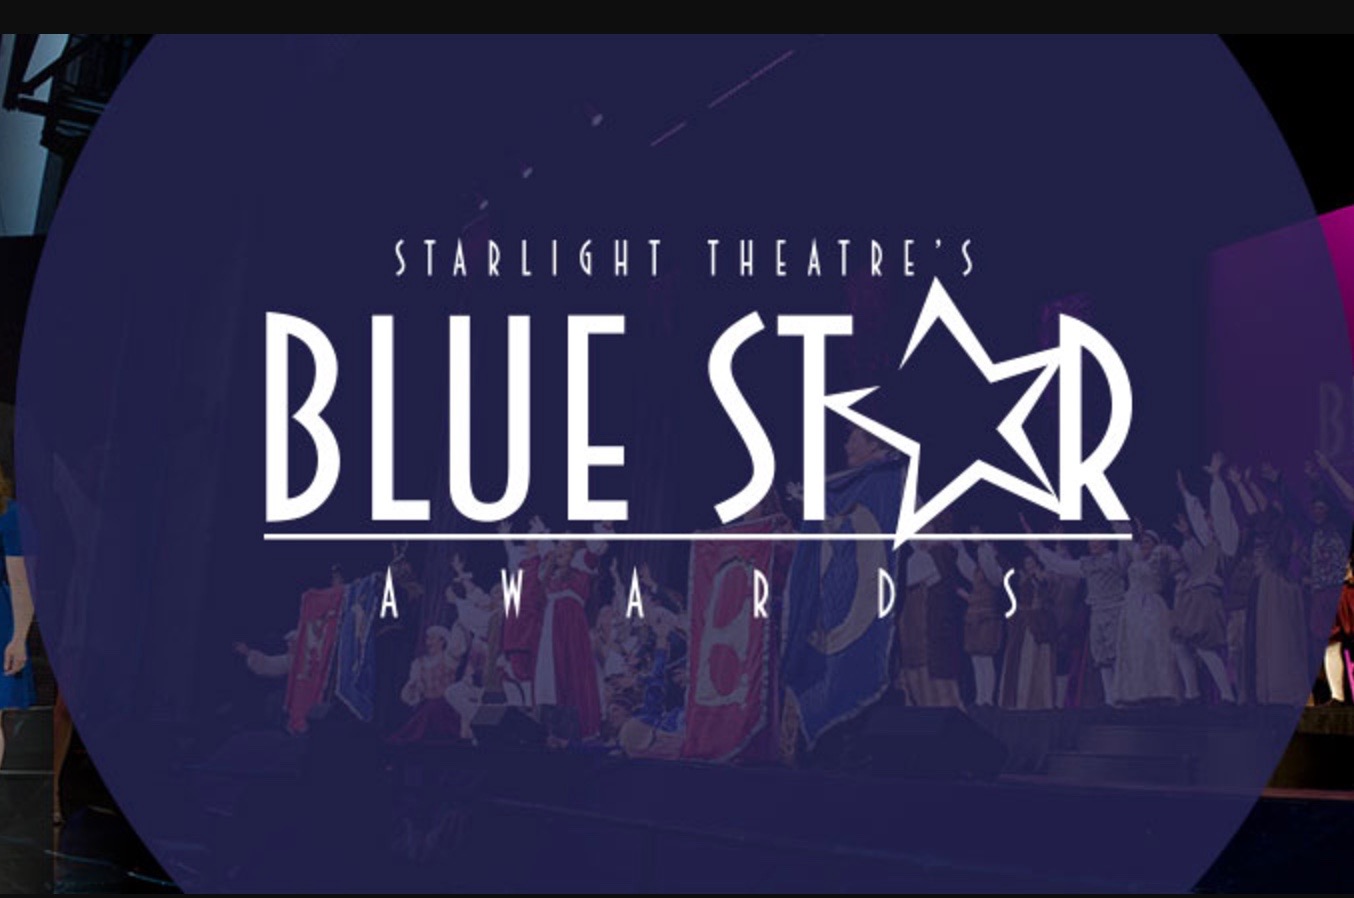 NW students nominated for Starlight Theatre